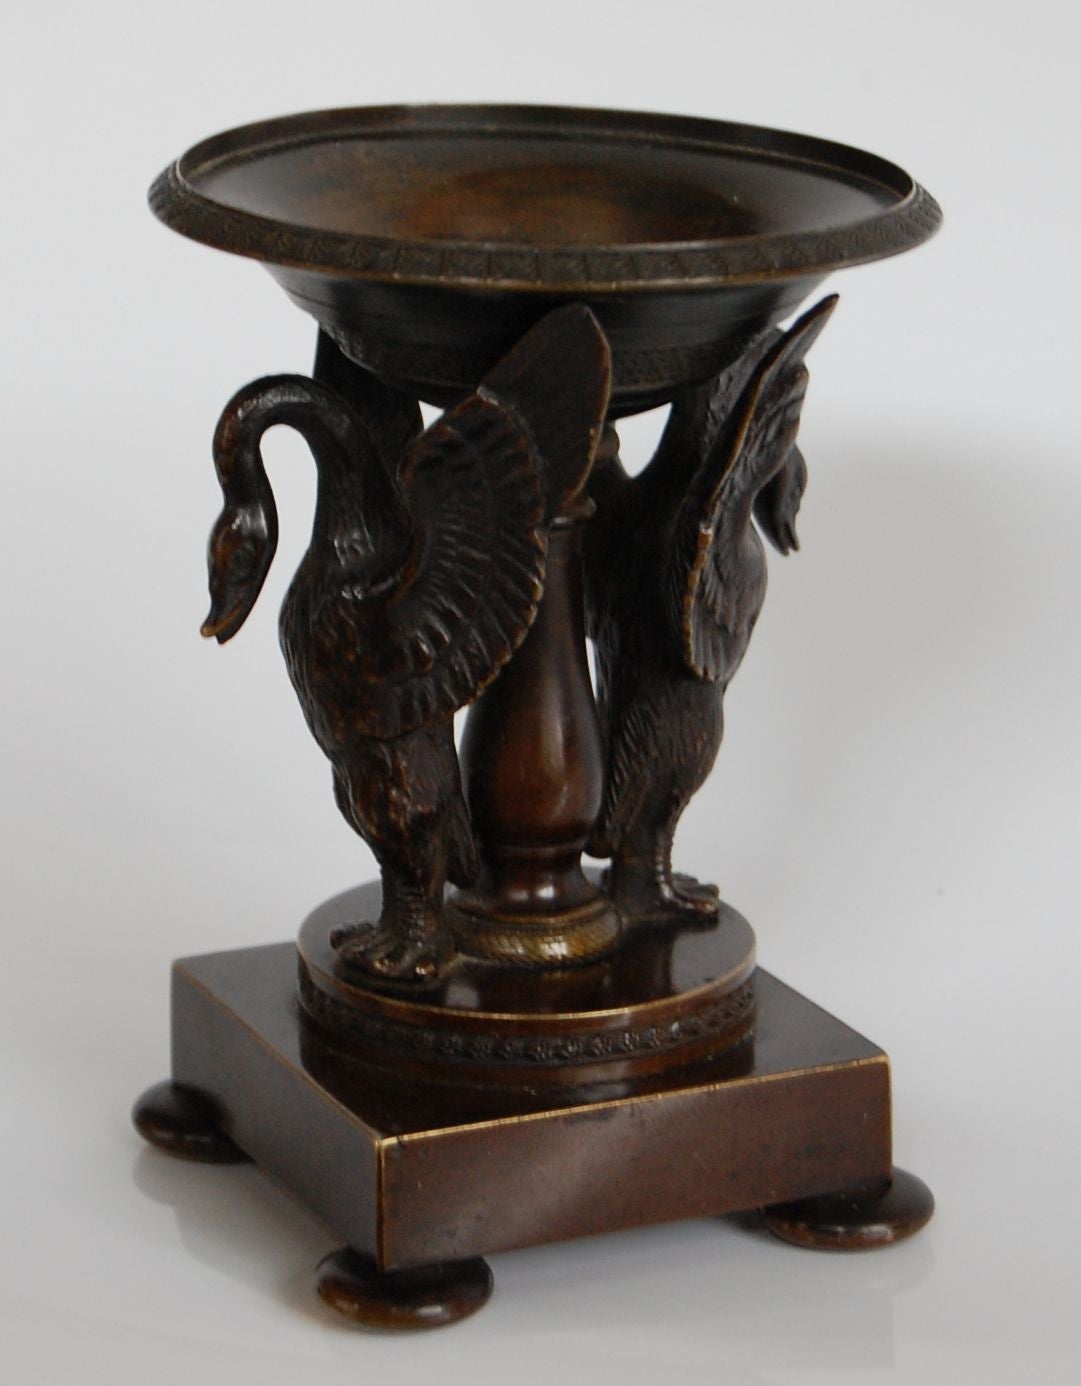 Bronze incense burner supported by two Heron on a raised square base with bun feet. Excellent condition.